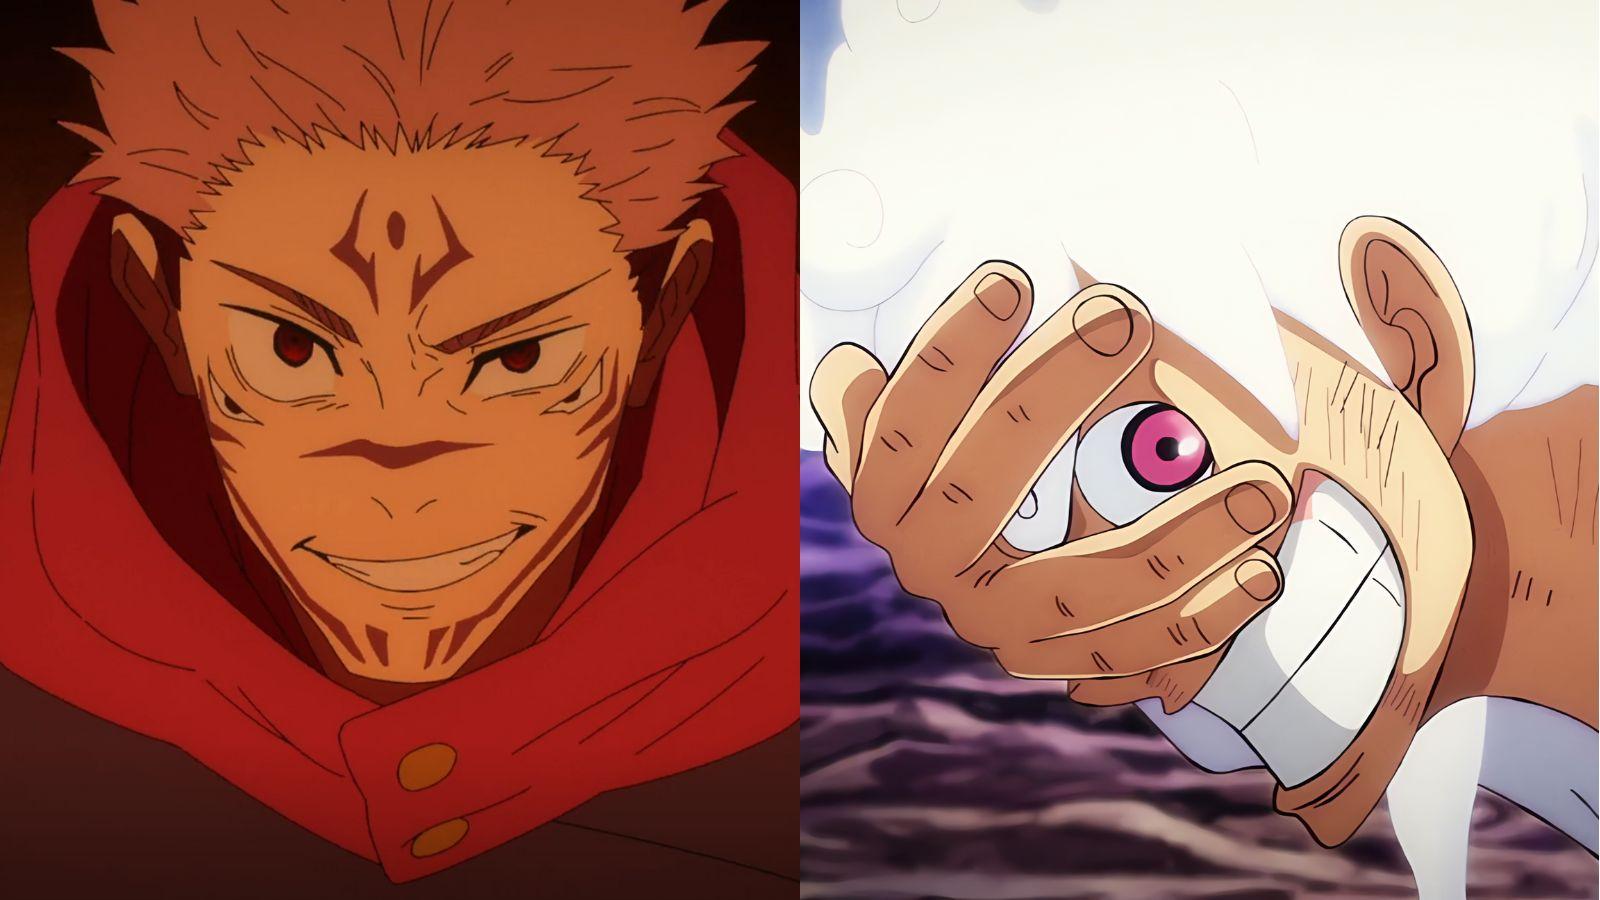 In Only 5 Episodes, 'Jujutsu Kaisen' Went From 'Mid' to